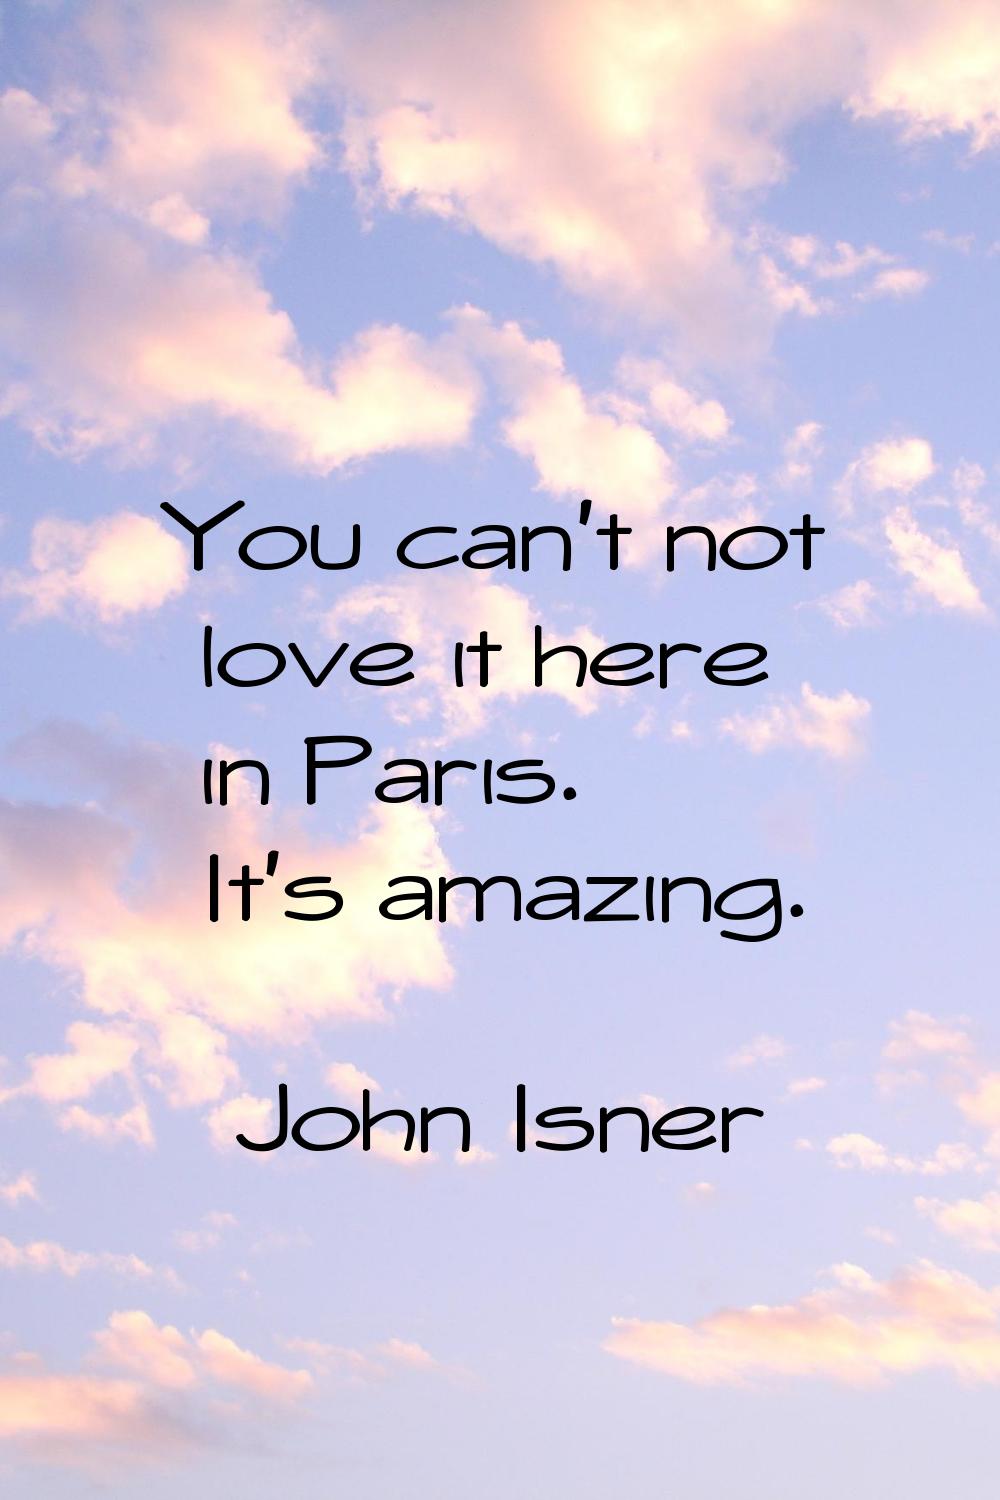 You can't not love it here in Paris. It's amazing.